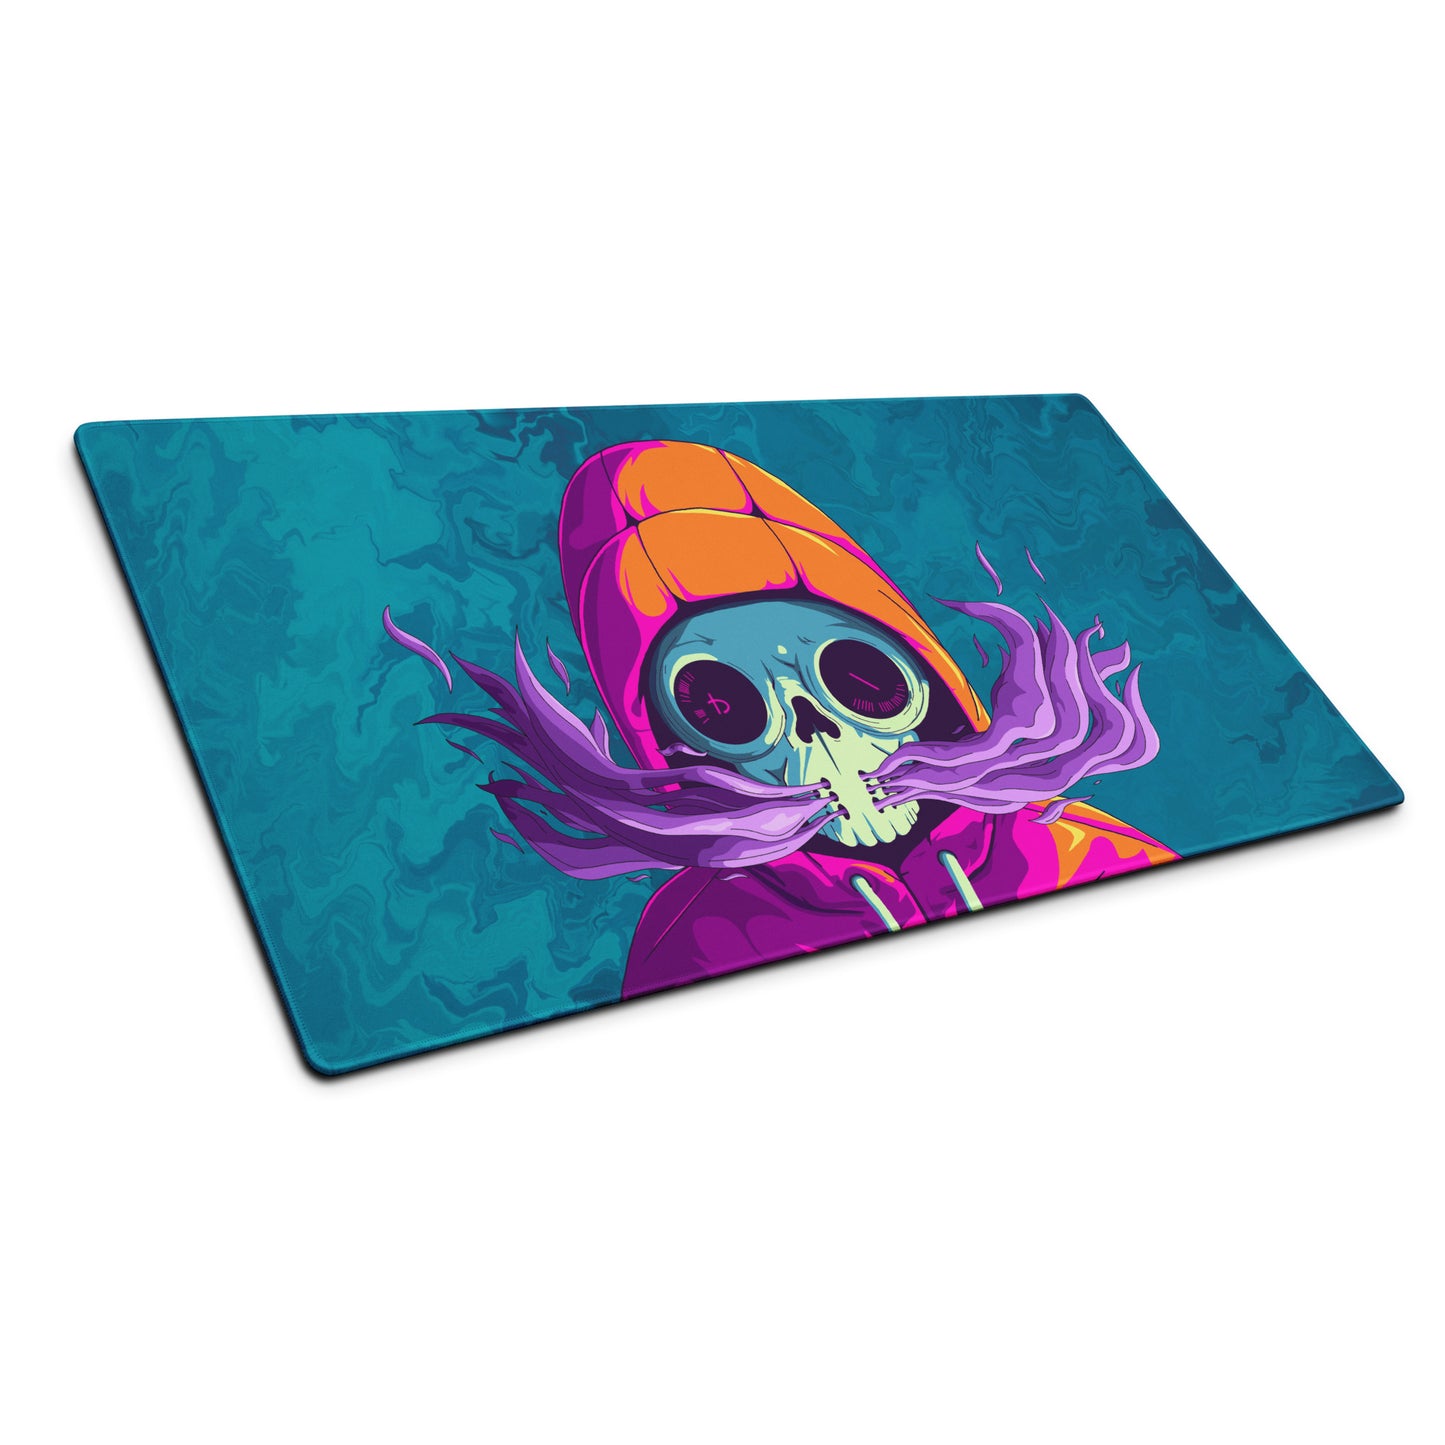 A 36" x 18" desk pad with a man wearing a skull gas mask breathing smoke out from it shown at an angle. Blue in color.